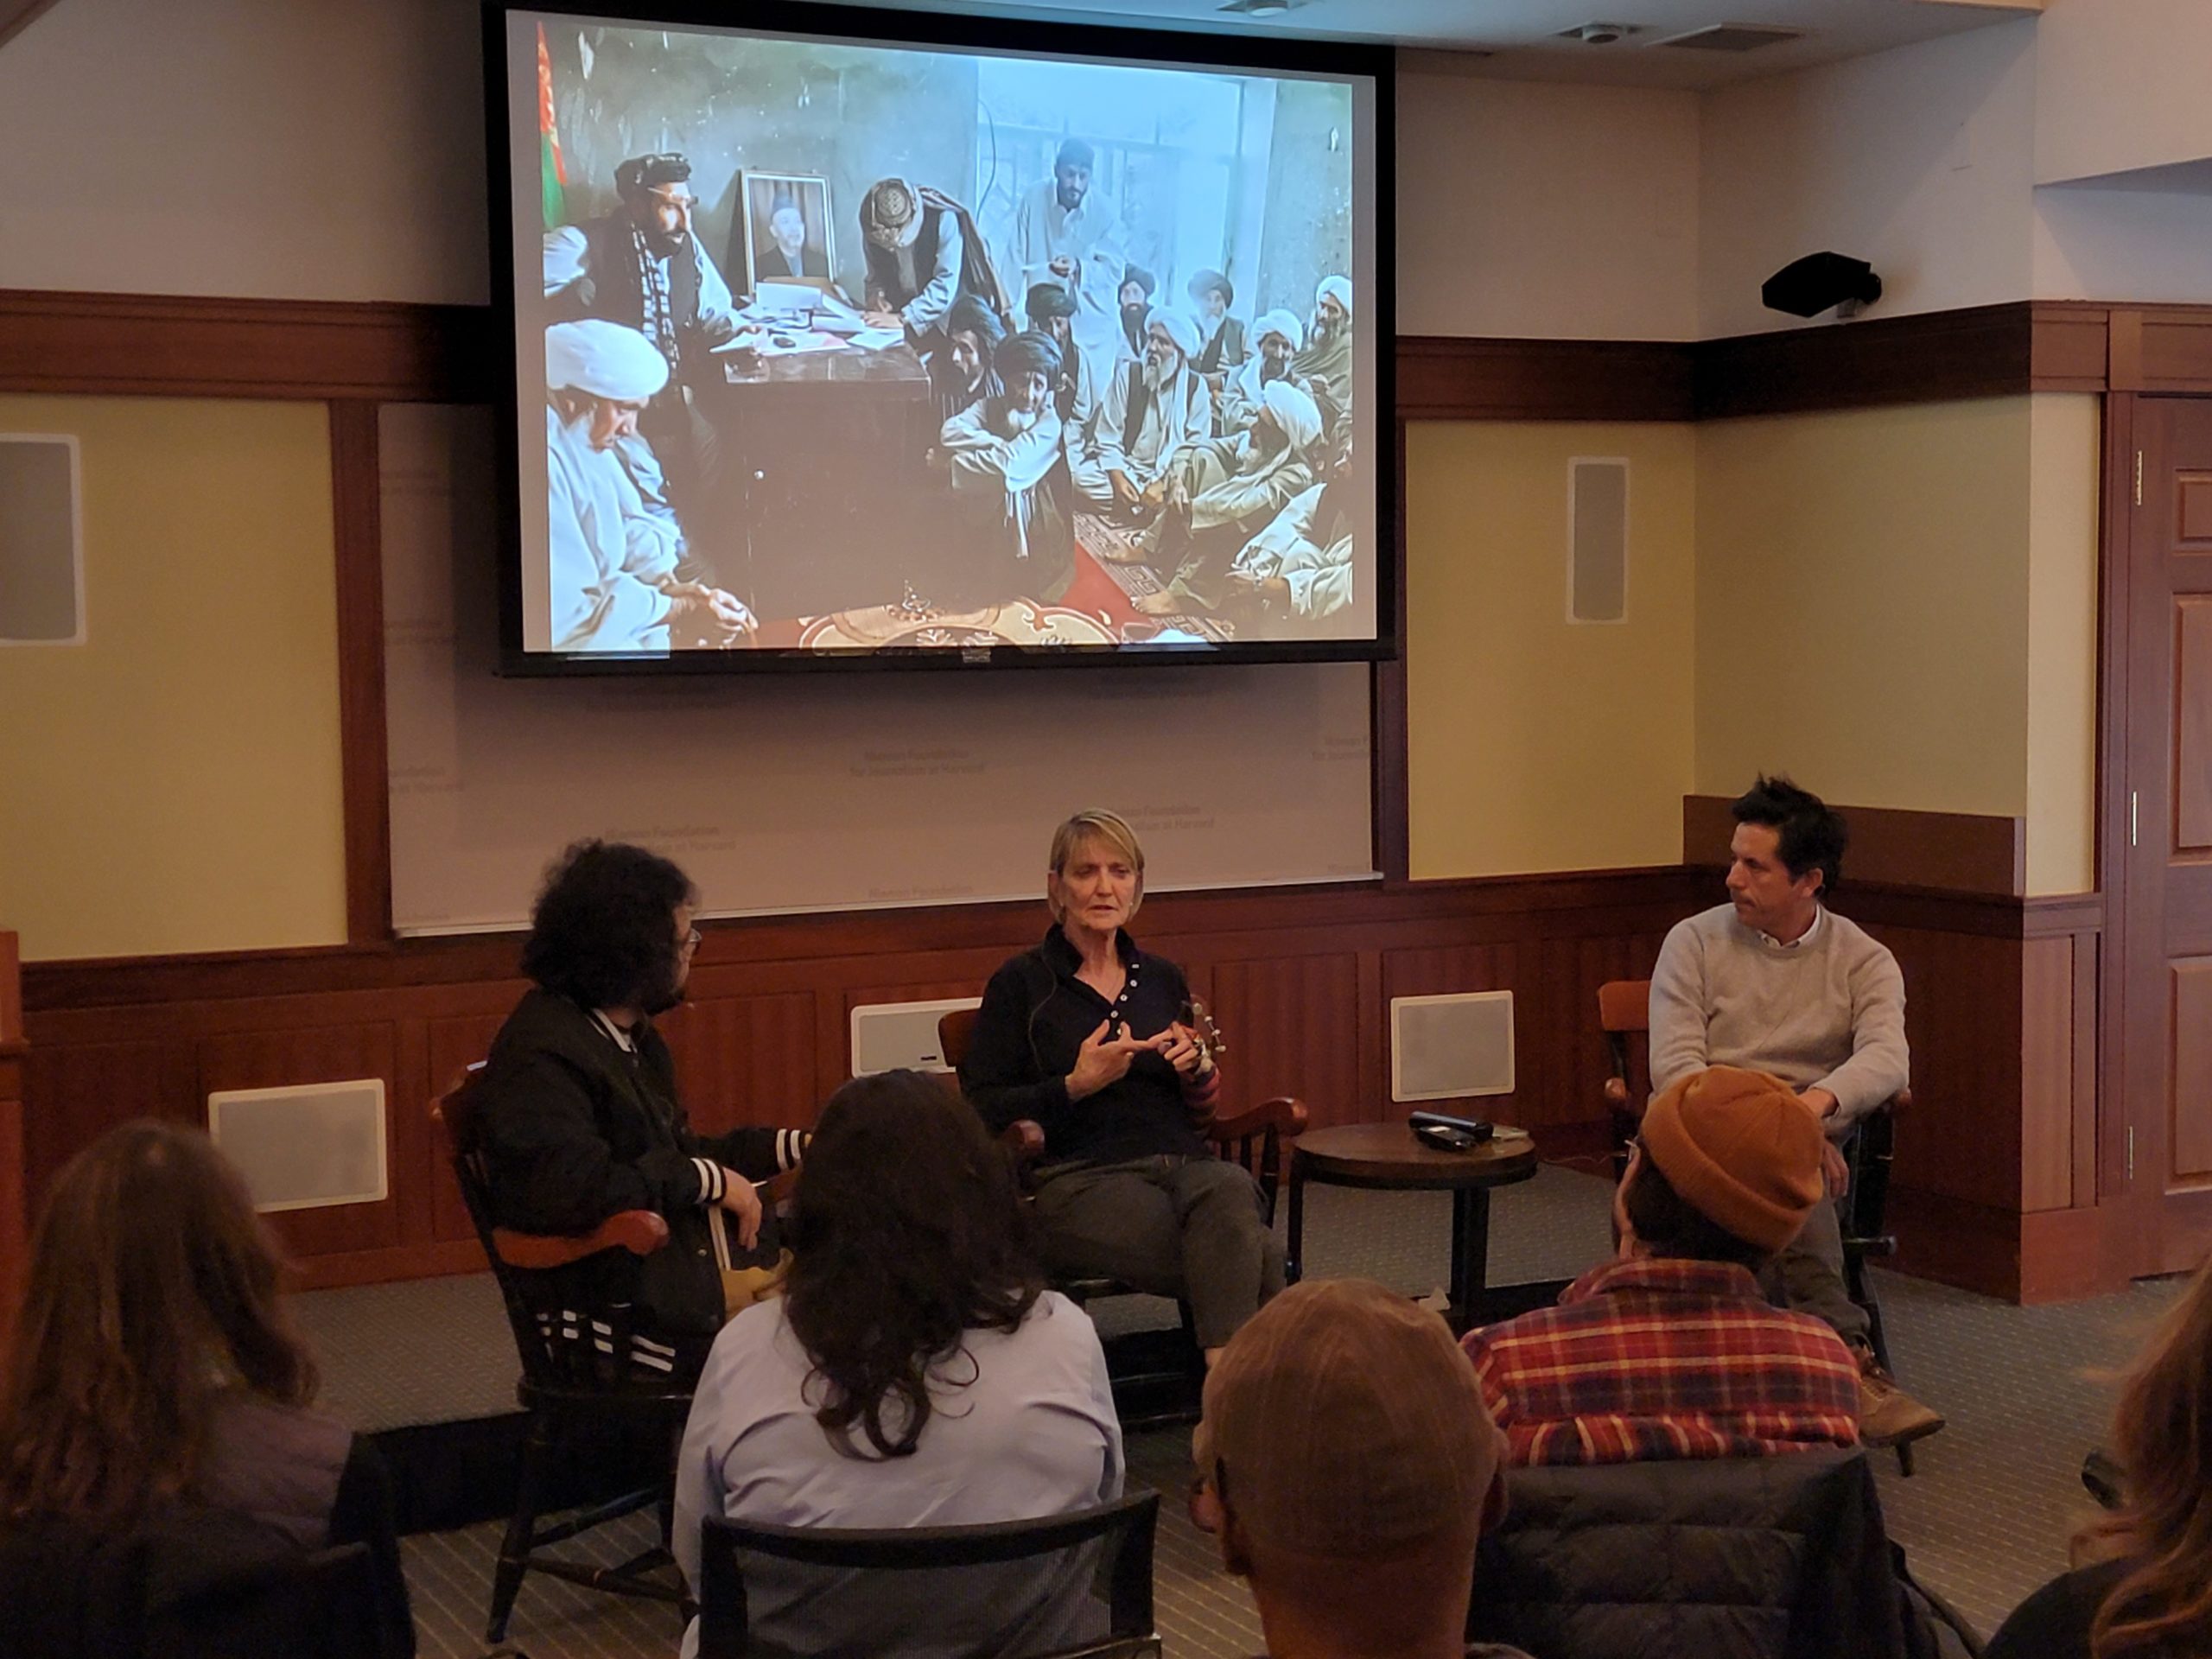 Journalist Kathy Gannon speaks with 2023 Nieman Fellows Fahim Abed and Moises Saman on Oct. 5, 2022 at the Nieman Foundation.